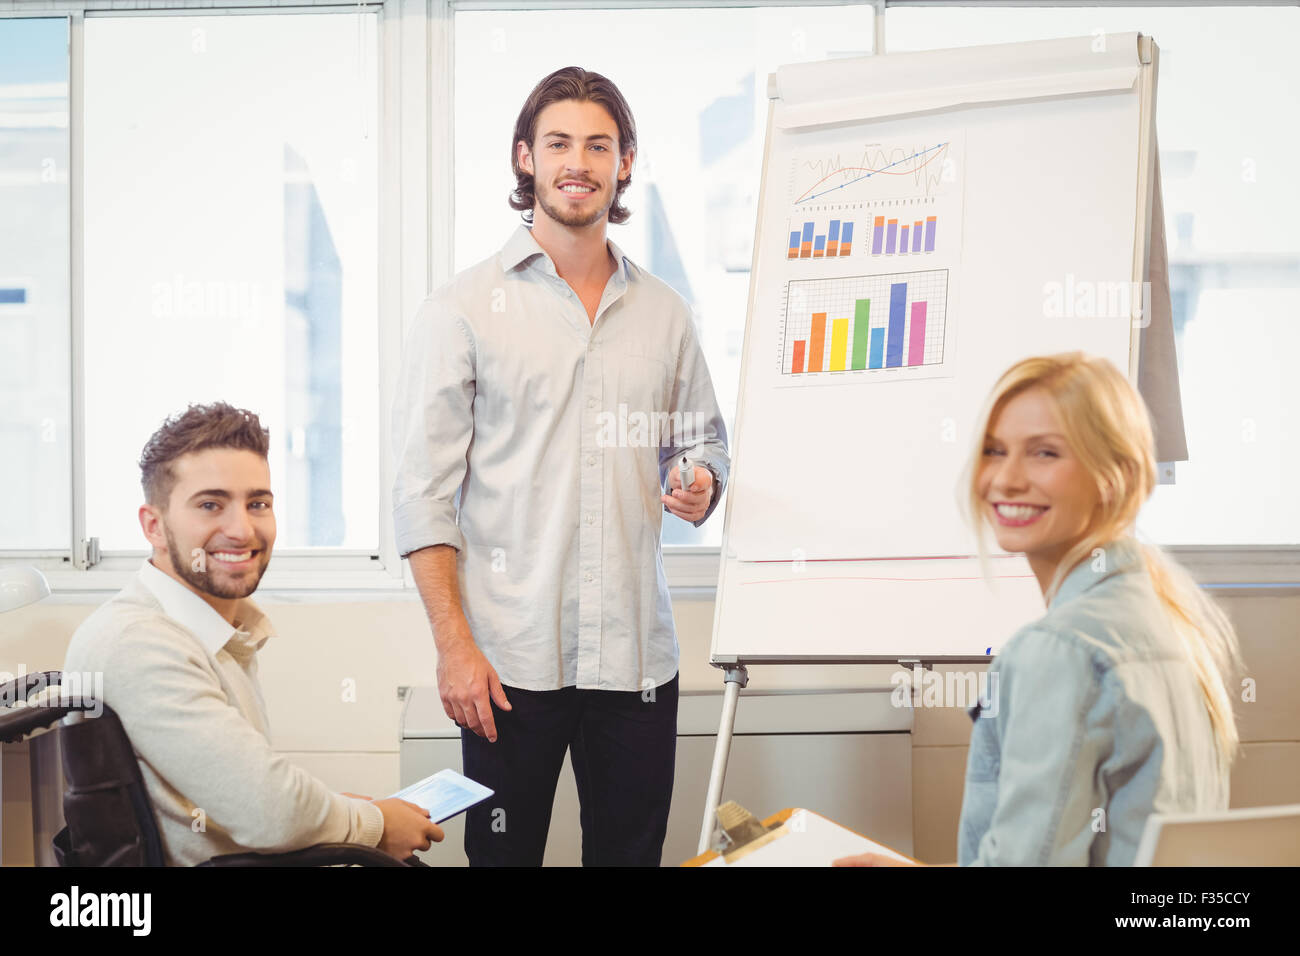 Business people with whiteboard during meeting Stock Photo